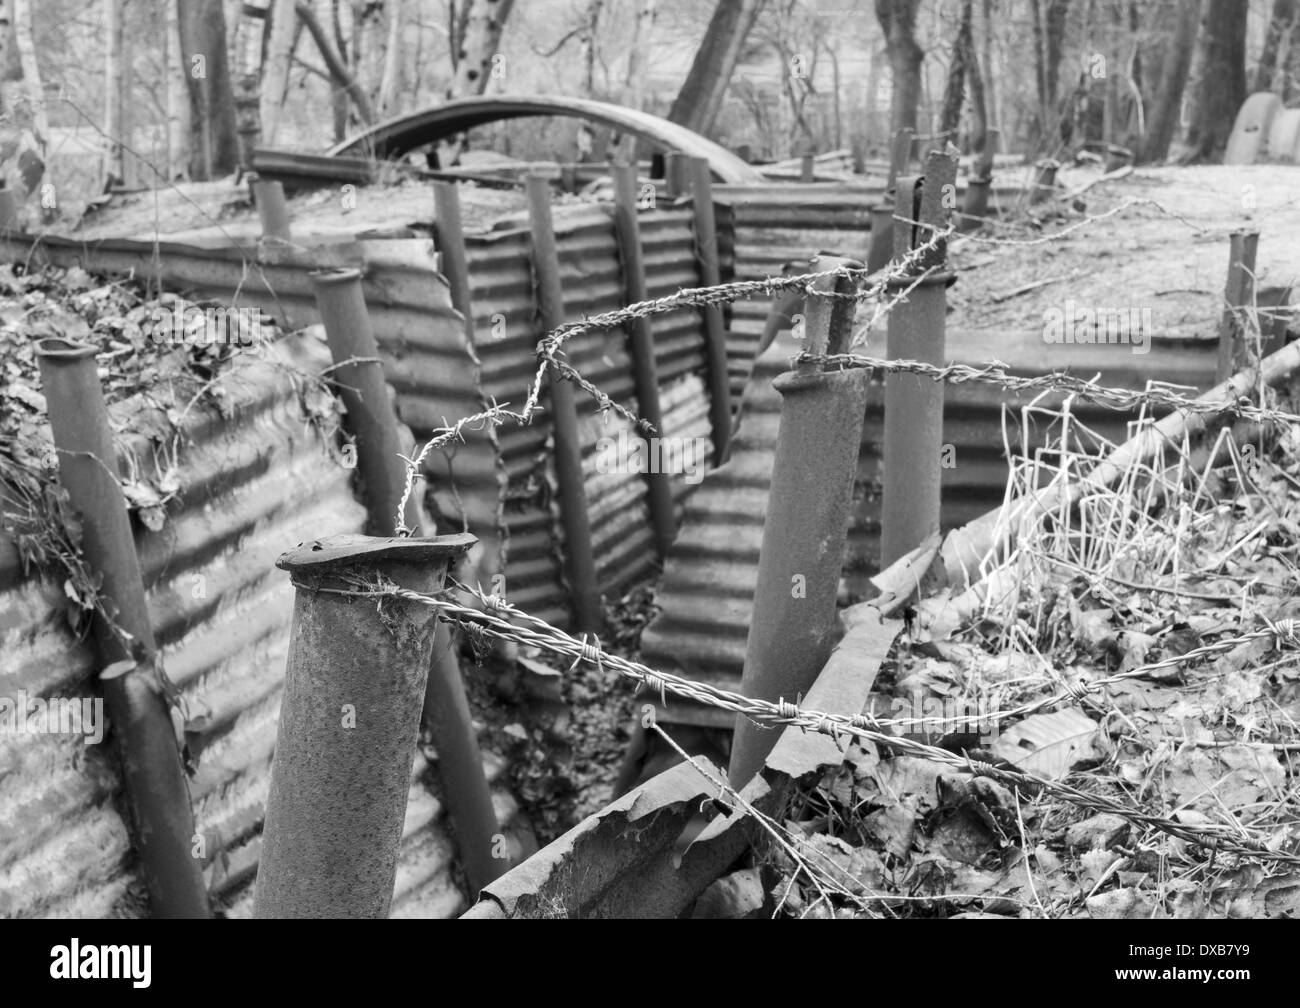 Restored British WW1 trench system at Sanctuary Wood, Hill 62, nr Ypres (Ieper), Belgium Stock Photo